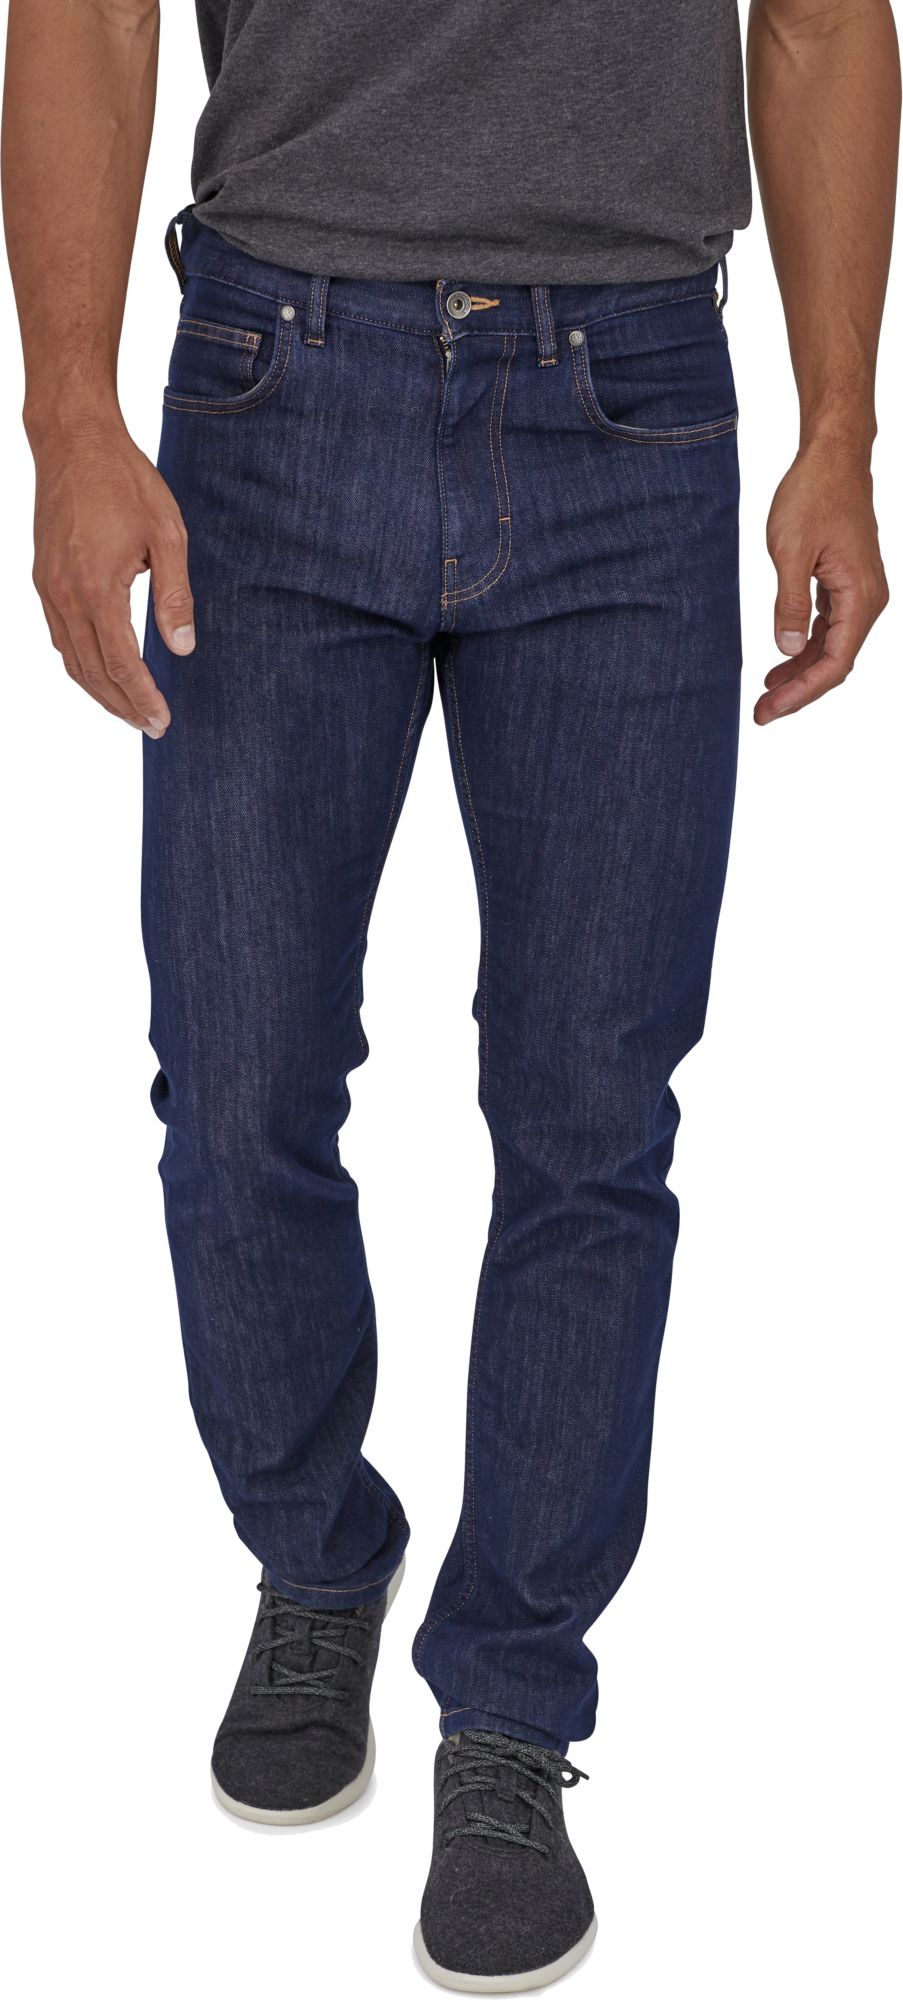 patagonia men's performance straight fit jeans